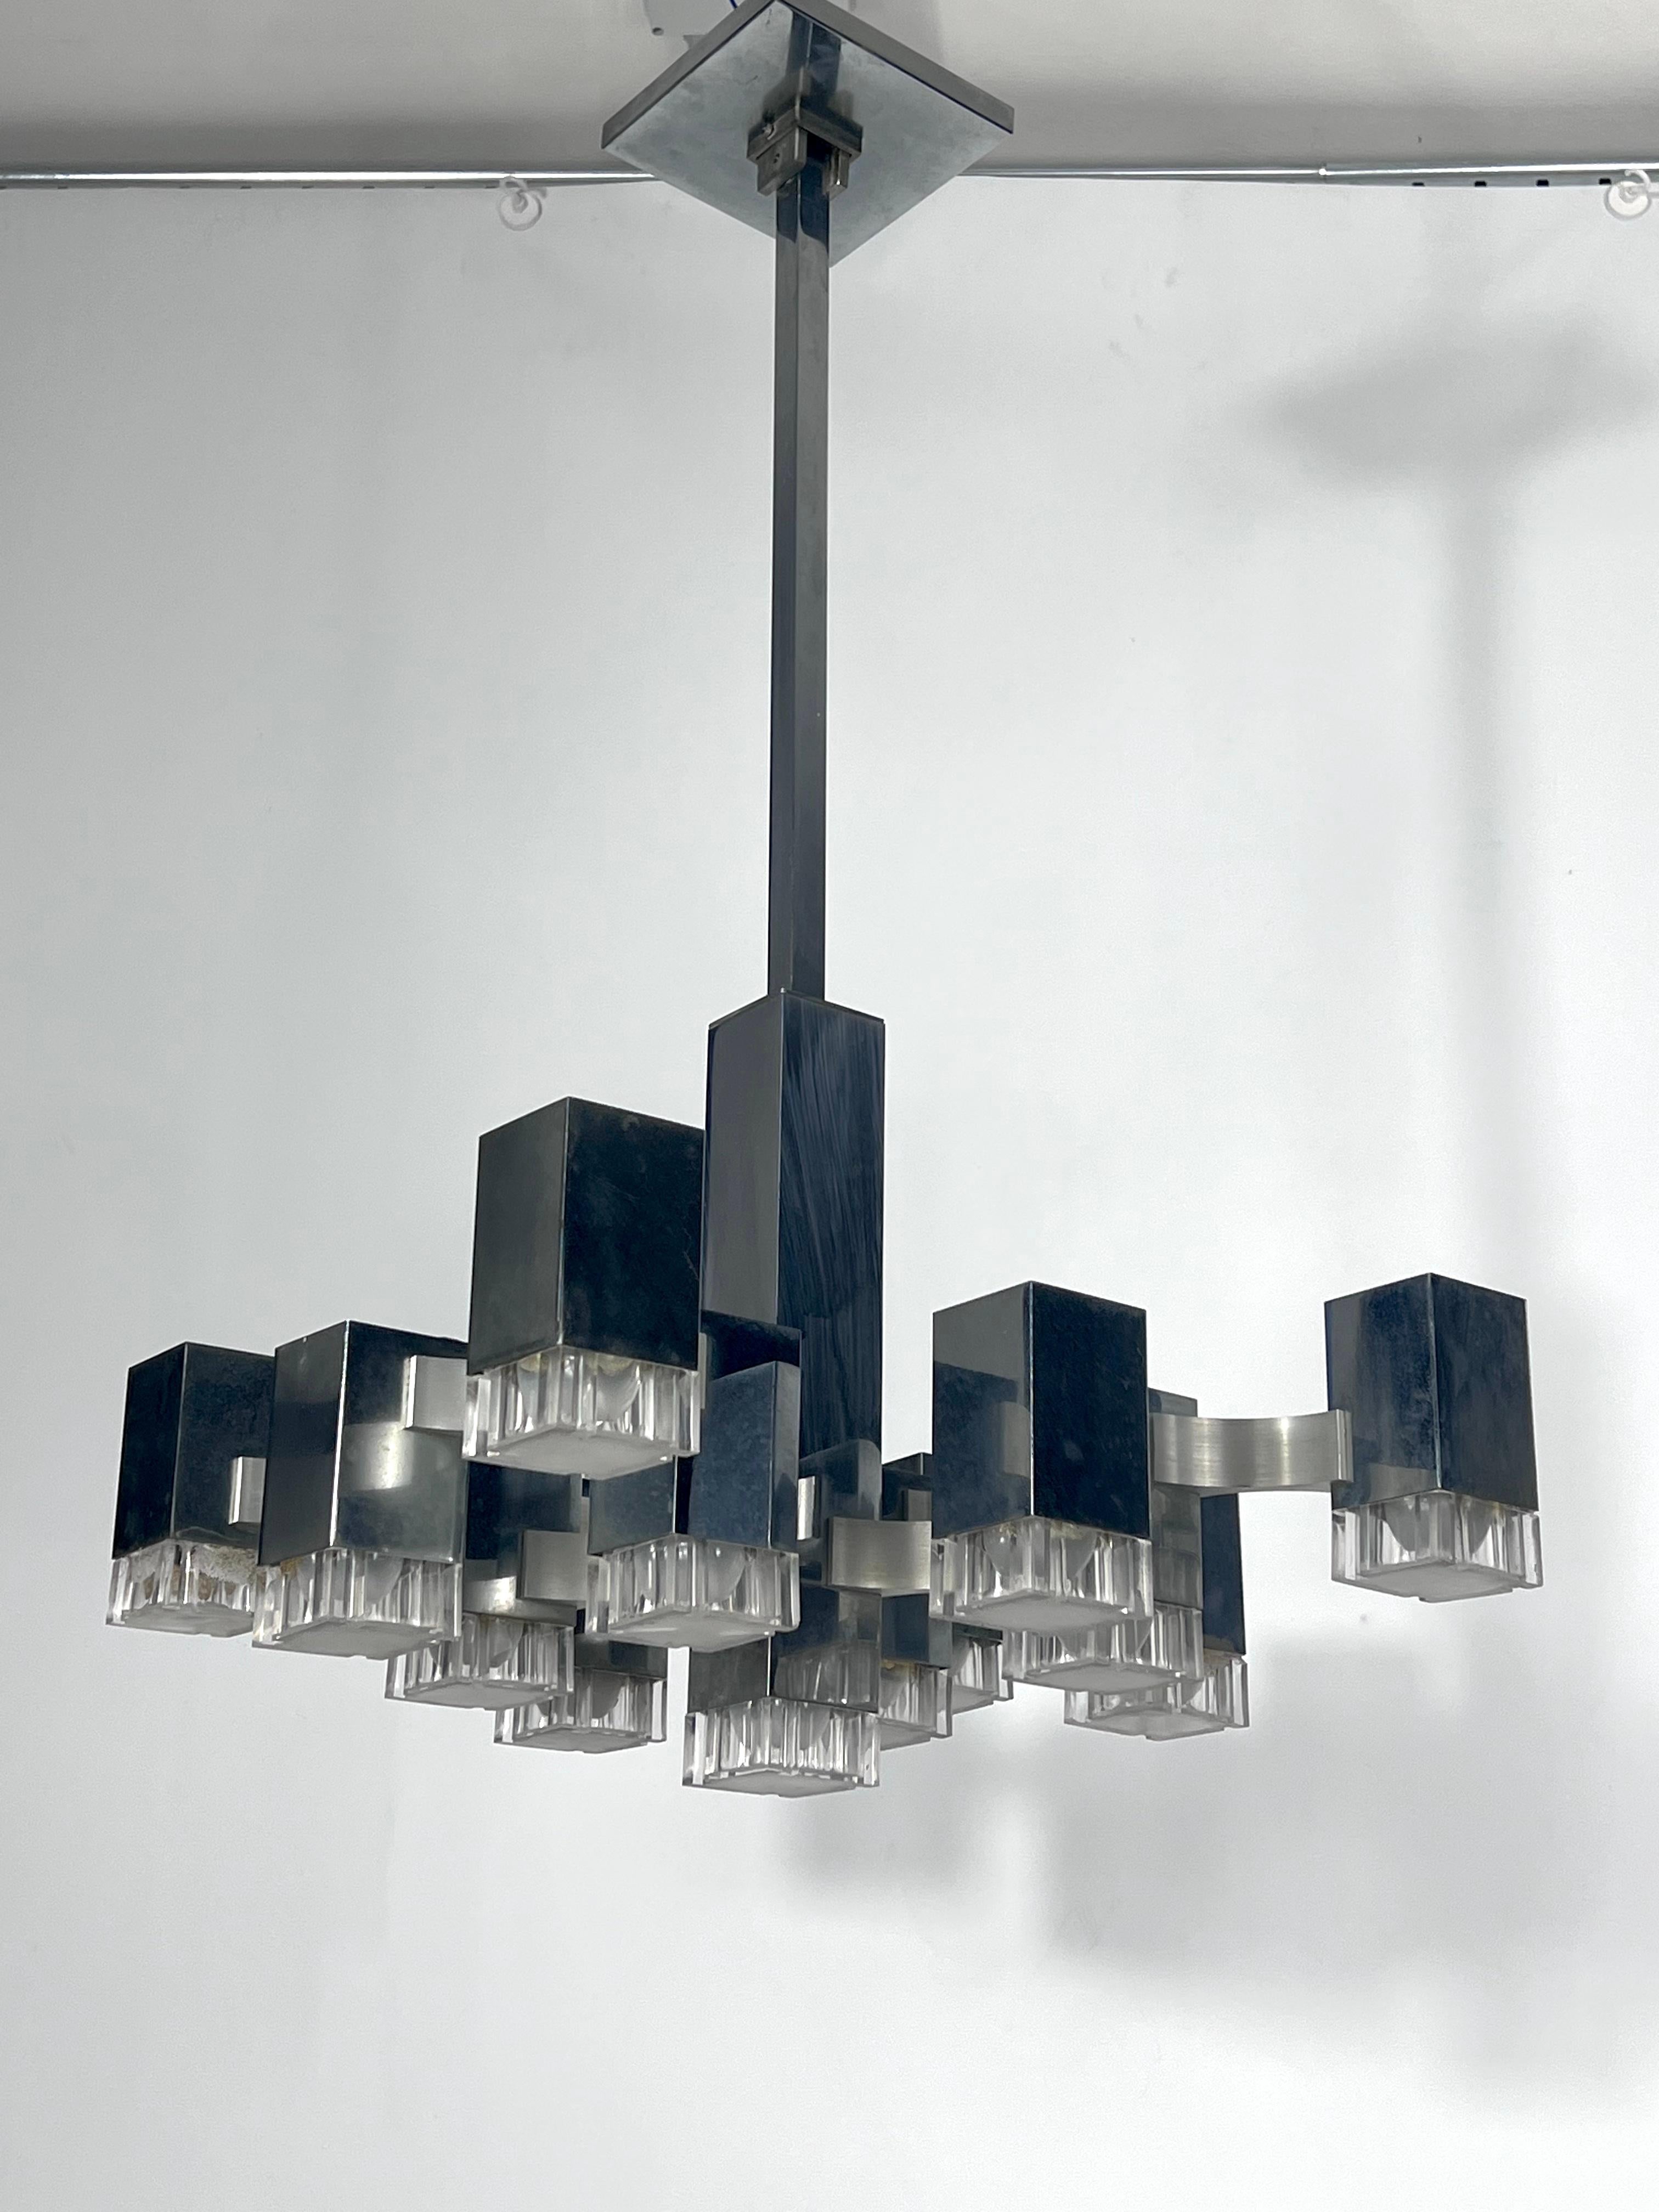 Good vintage condition with trace of age and use for this chrome and plexiglass chandelier produced in Italy during the 70s. Model Cubic manufactured by Sciolari.